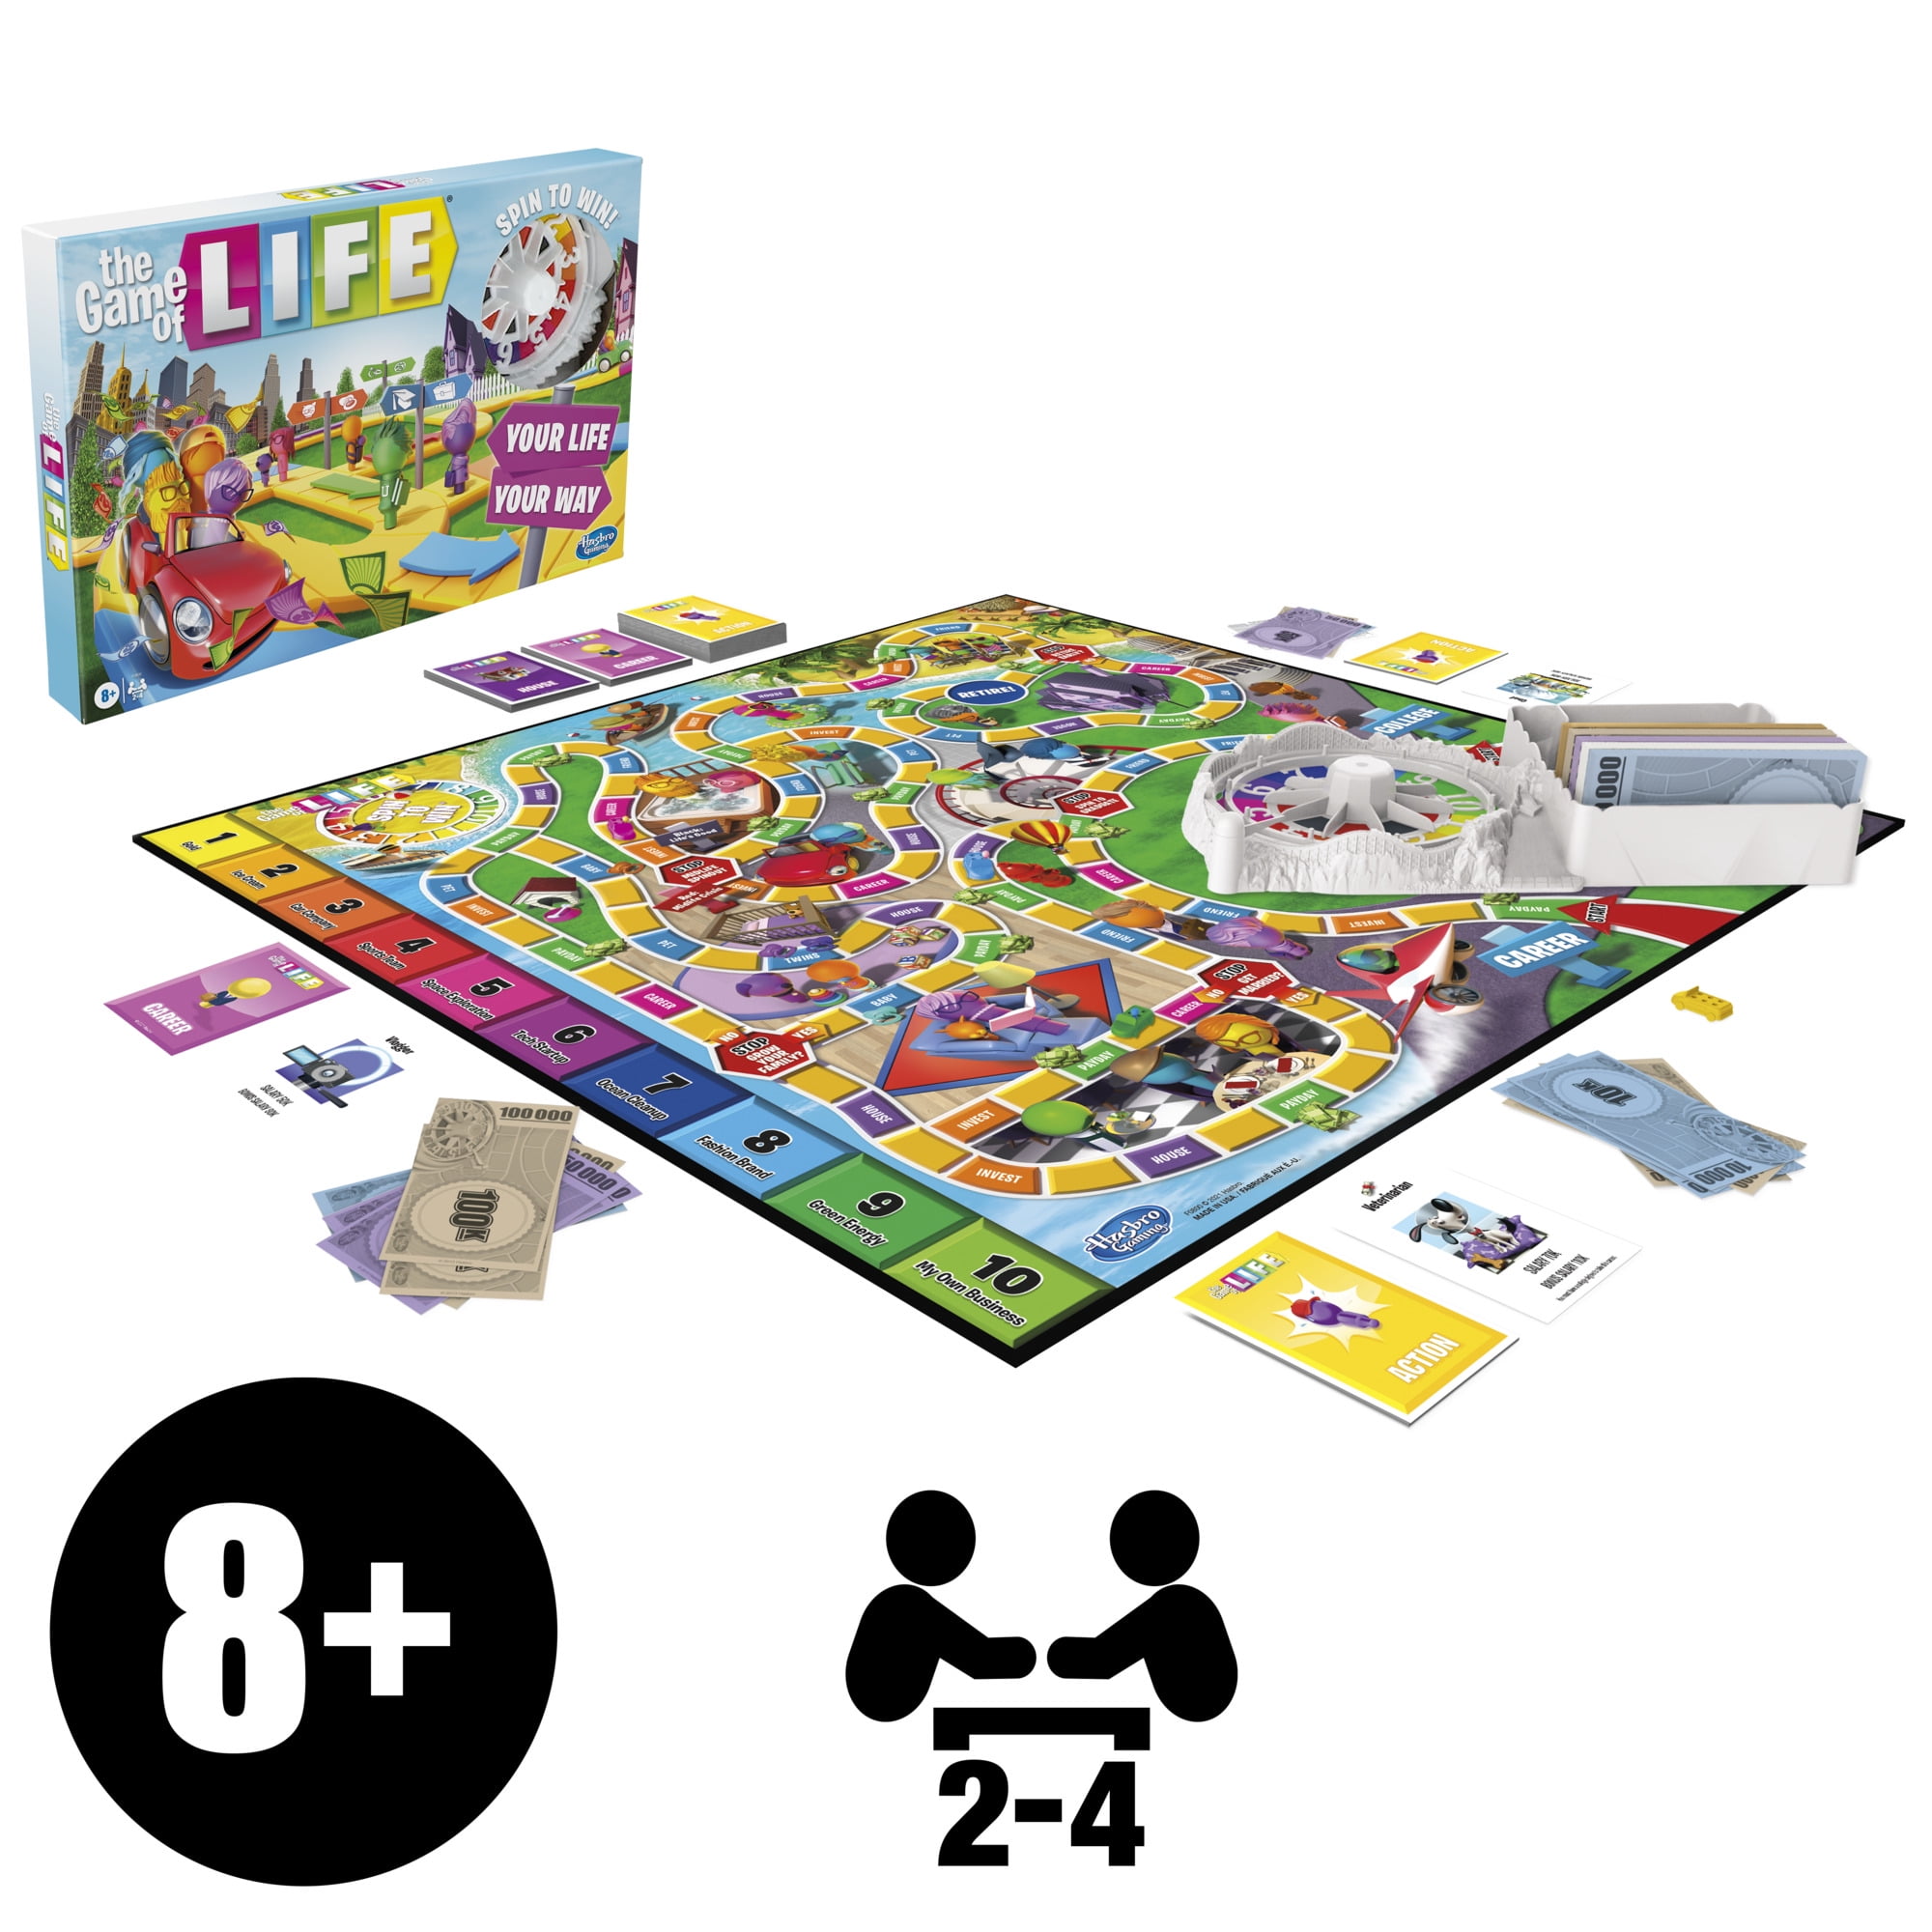 The Game of Life PC - Board Game Beast